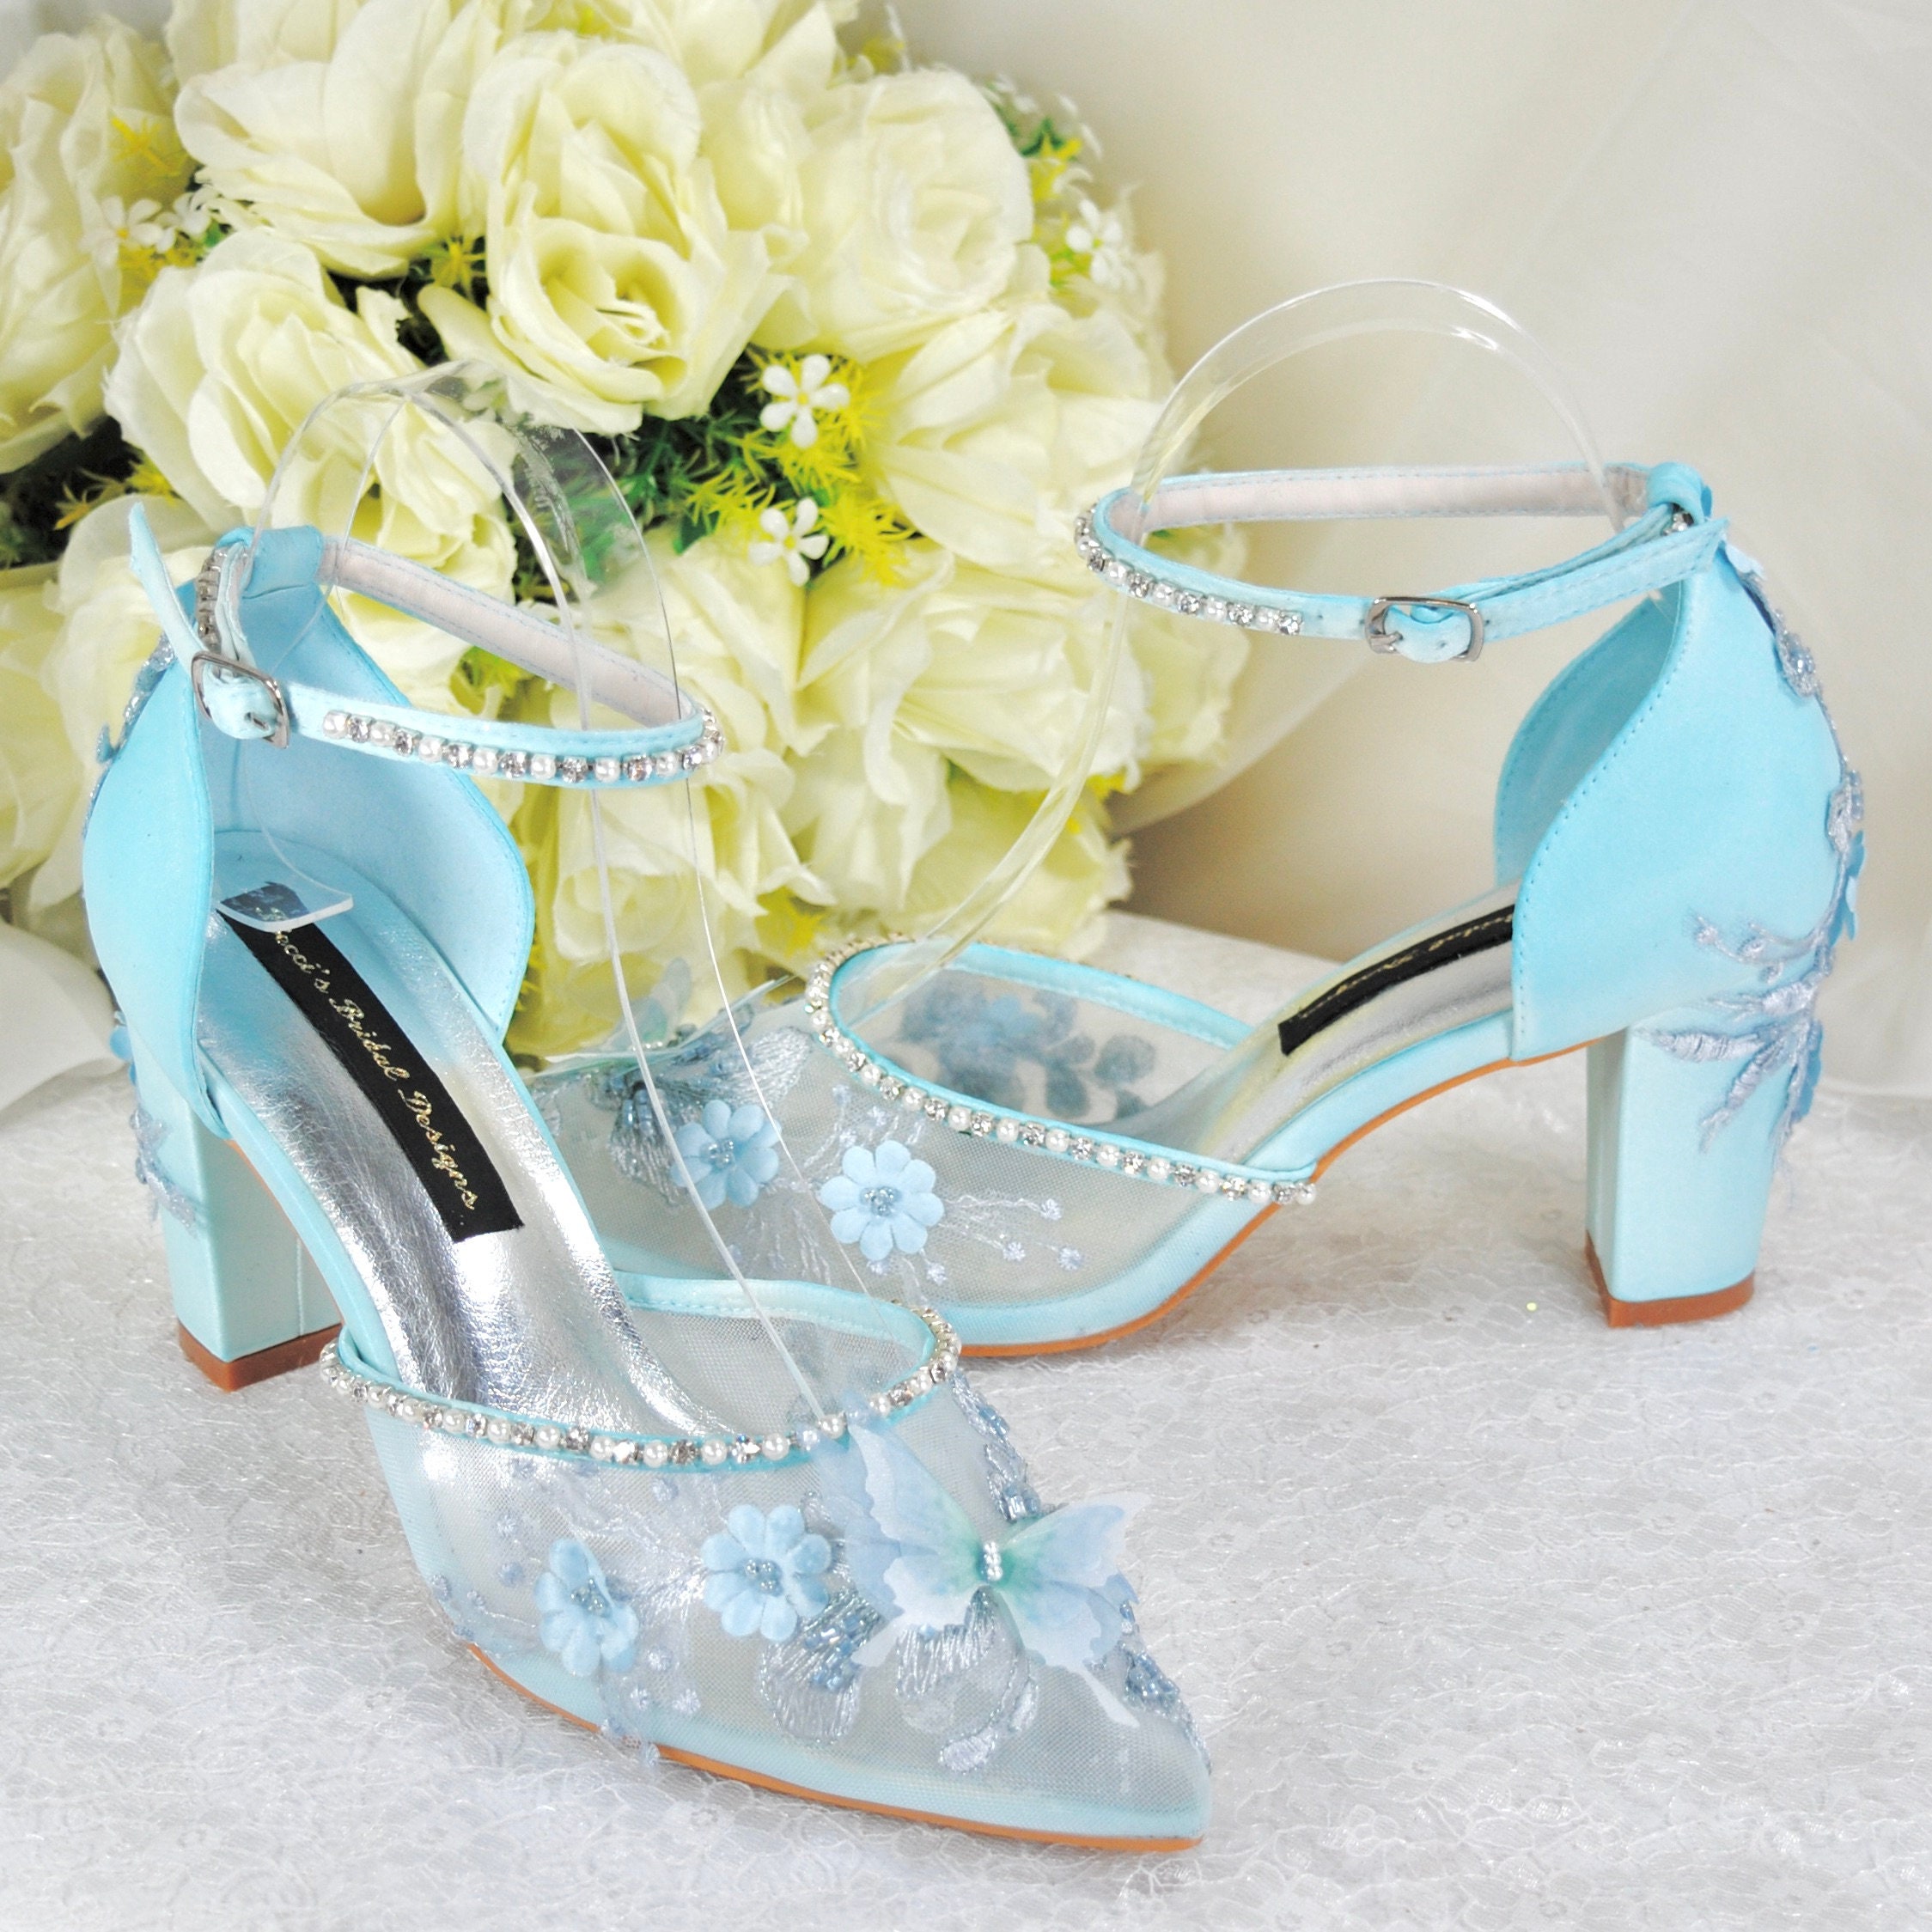 Newest Women Butterfly Thin High Heels Sandals Exquisite Fashion Wing Shoes  Female Banquet Party Wedding Dress High Heels - Women's Sandals - AliExpress